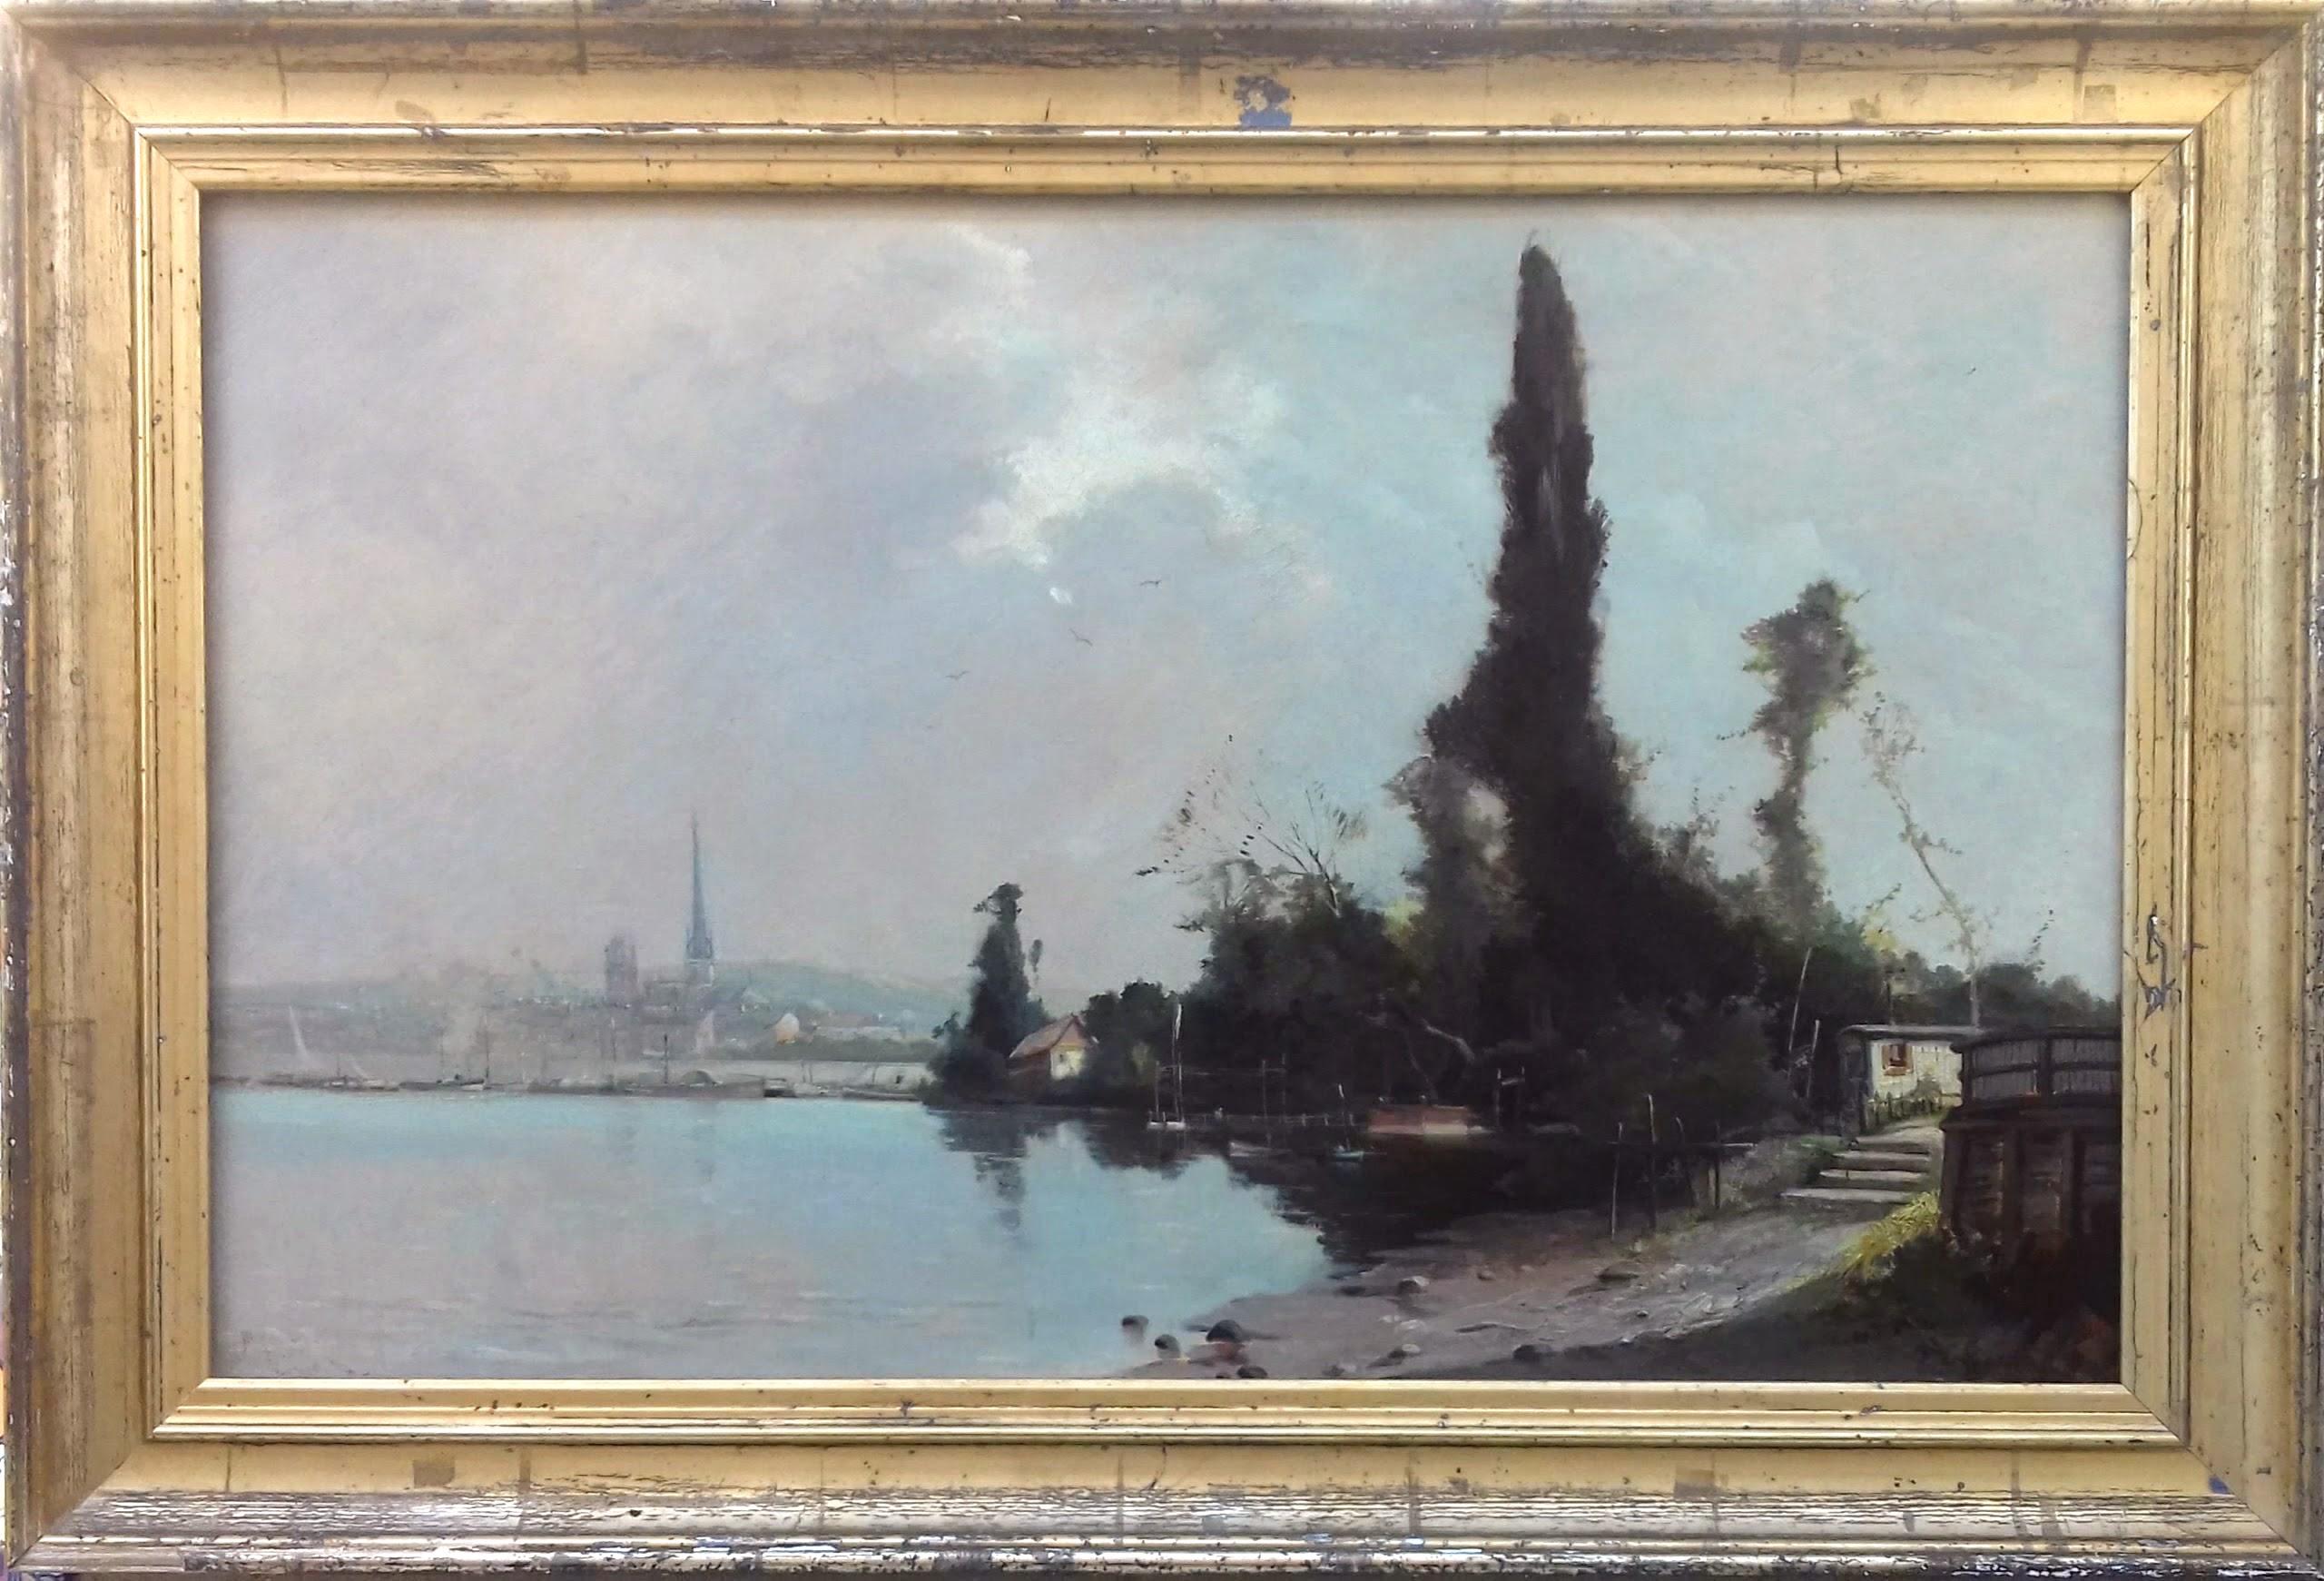 Impressionist river landscape Rouen the Seine Normandy France 19th Century - Painting by Unknown